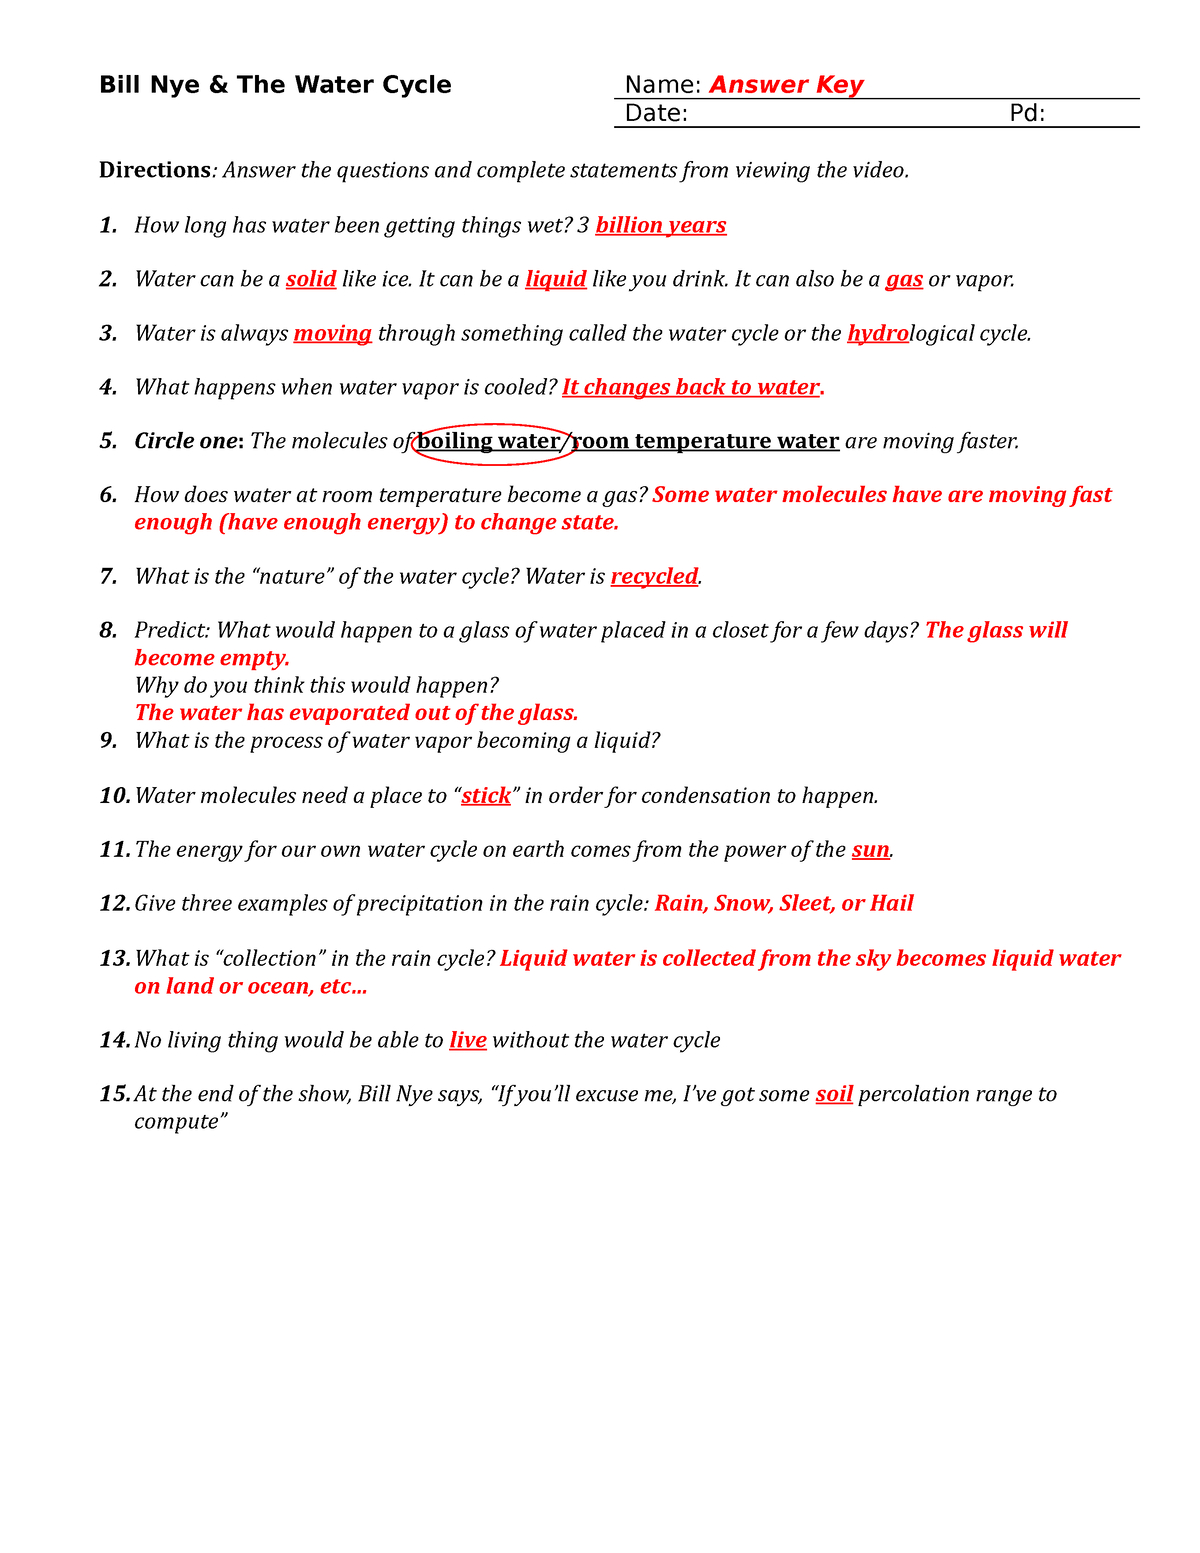 Bill Nye and The Water Cycle Handout 21 - Bill Nye &amp; The Water Within Water Cycle Worksheet Answer Key